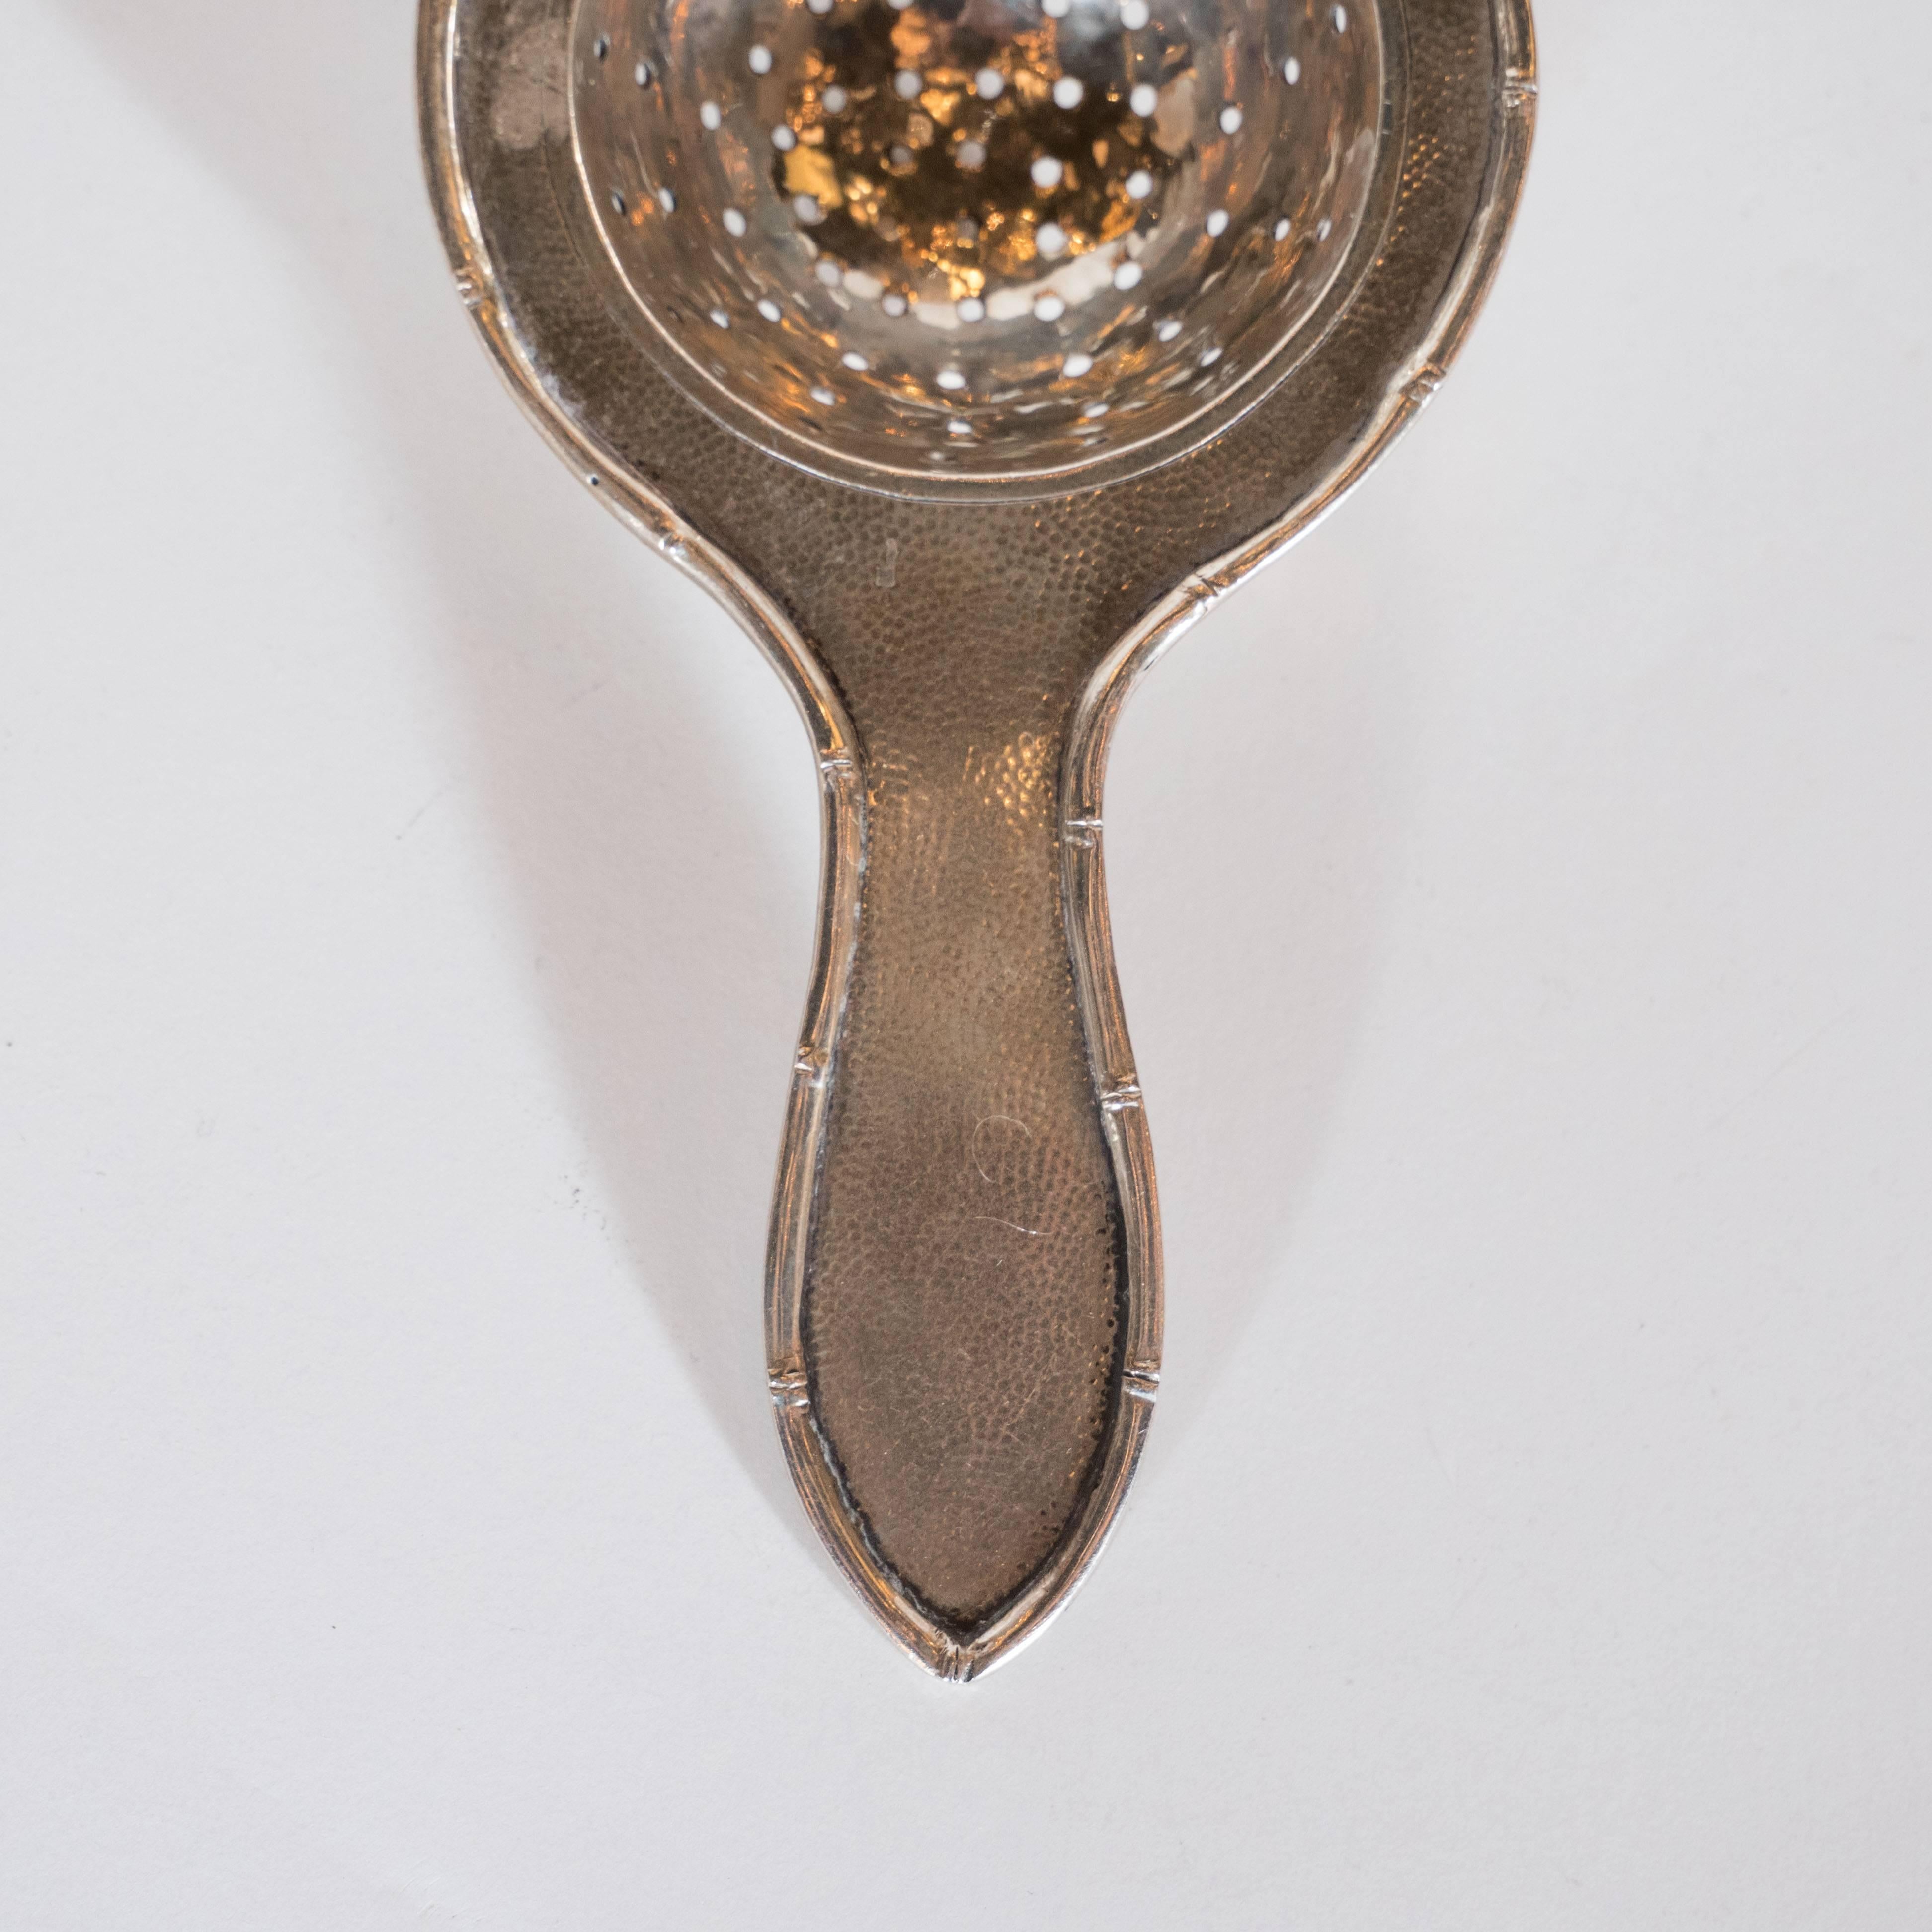 English 19th Century Sterling Silver Perforated Tea Strainer For Sale 1